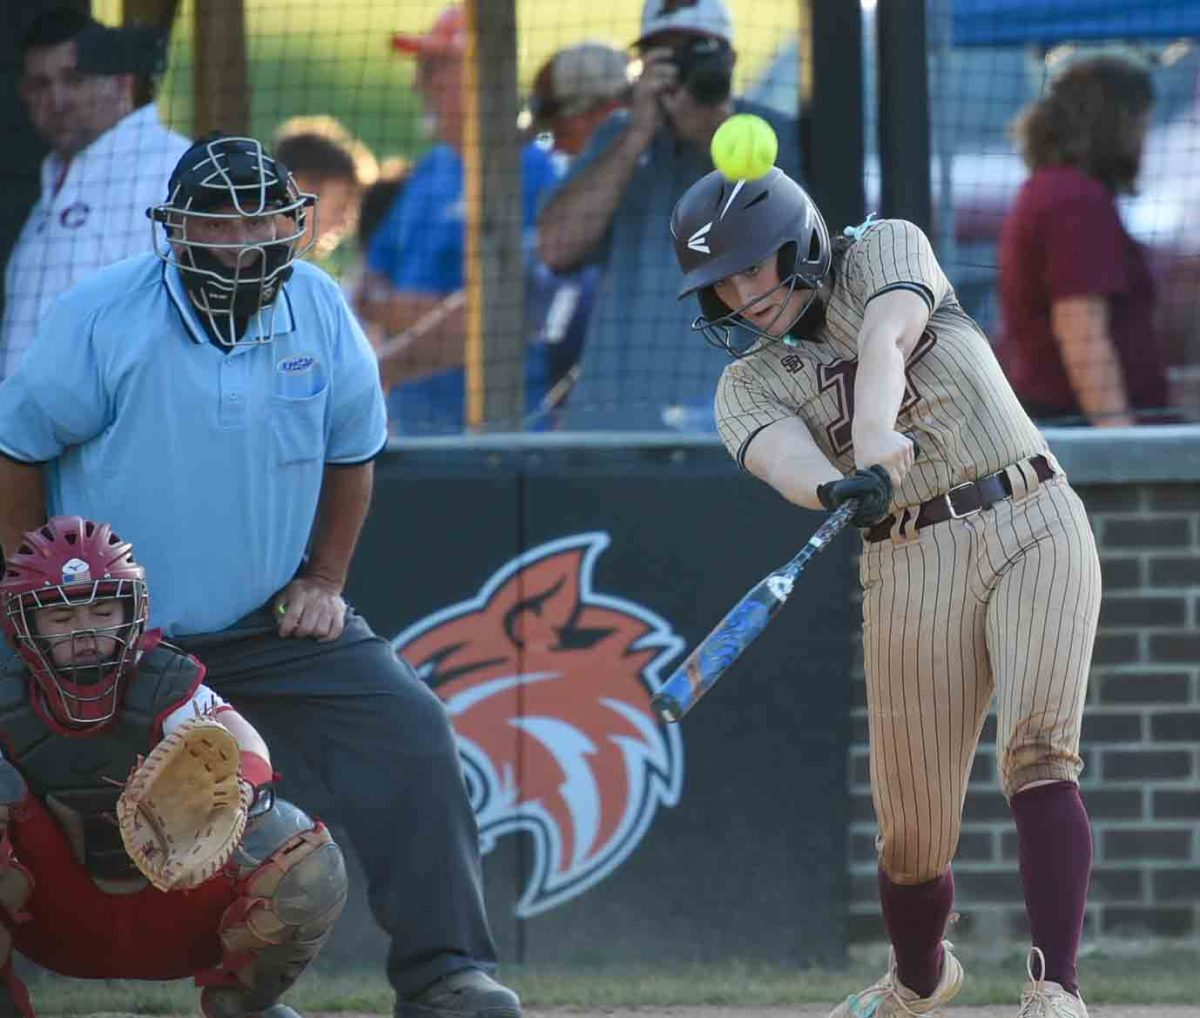 Pinevilles Addison Slone connected on a three-run homer in 13th Region Tournament action Tuesday. The Lady Hounds advanced with a 4-3 victory.